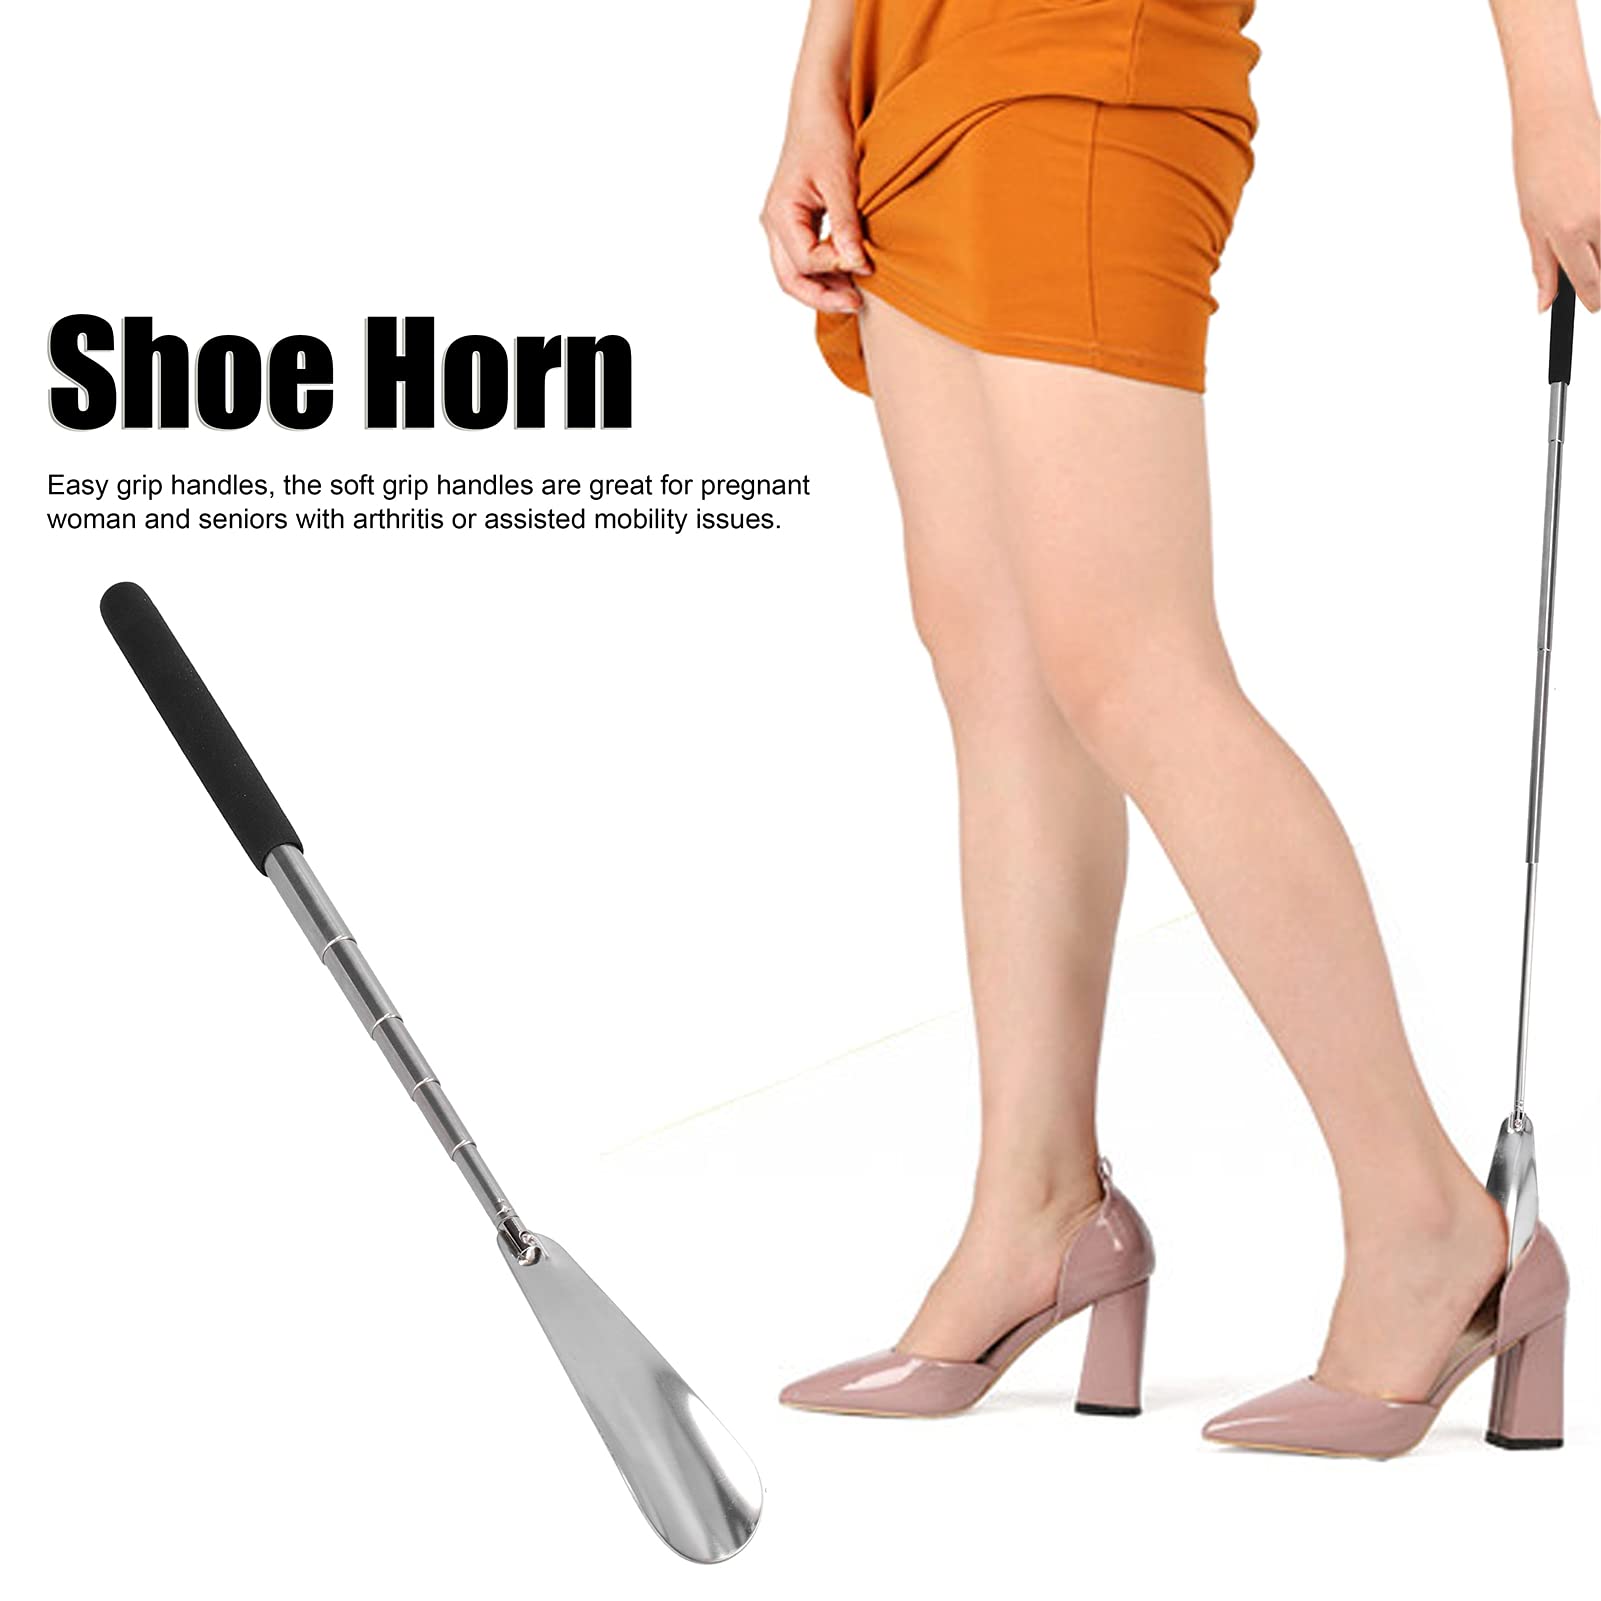 Bagima Shoe Shoe 30 * 5 * 2 Telescopic Shoe Horn Stainless Steel Adjustable Shoehorn with Long Handle for Elderly Pregnant Woman